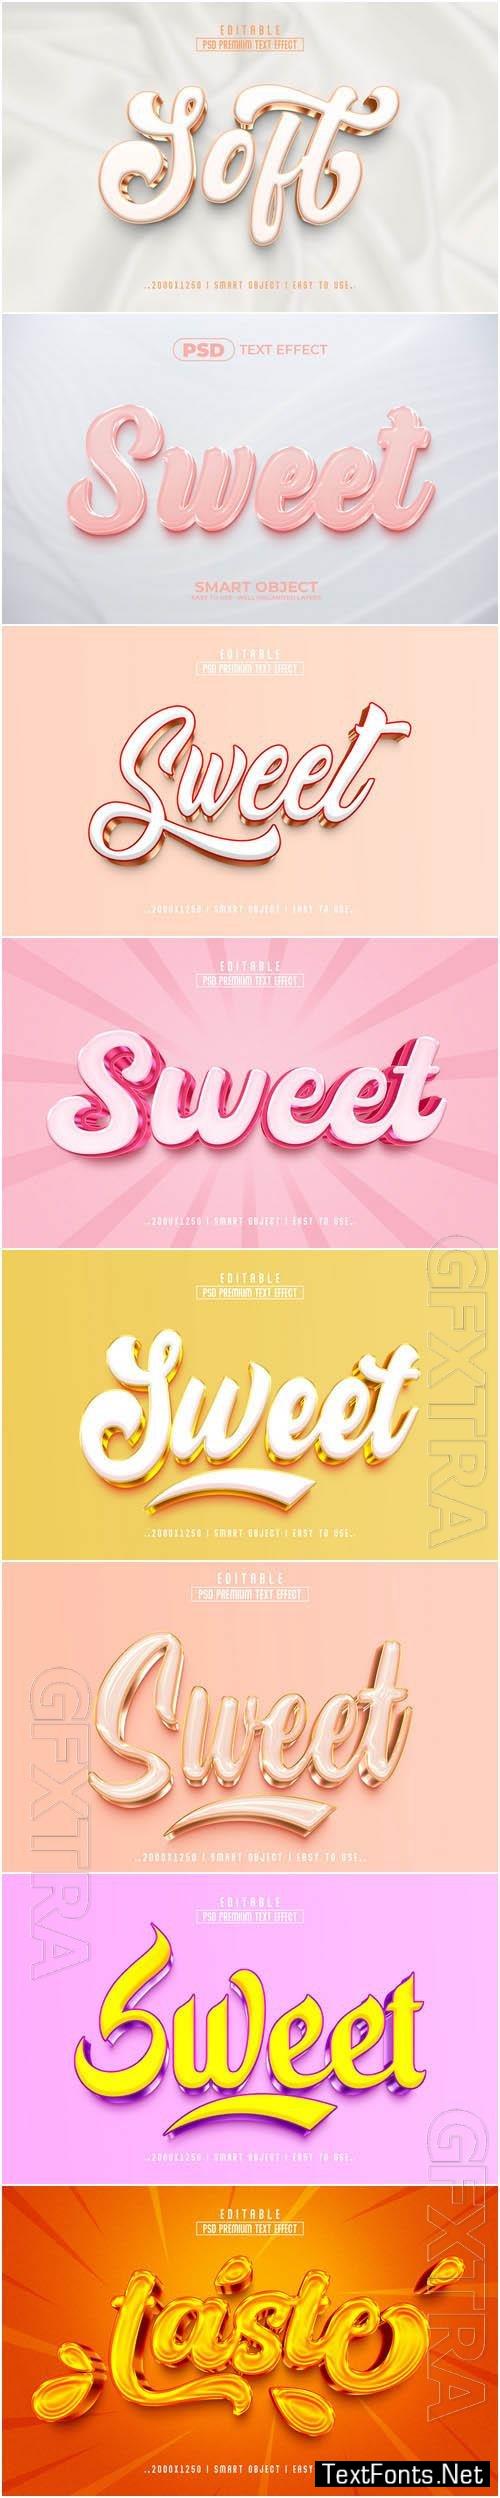 free photoshop text styles effects